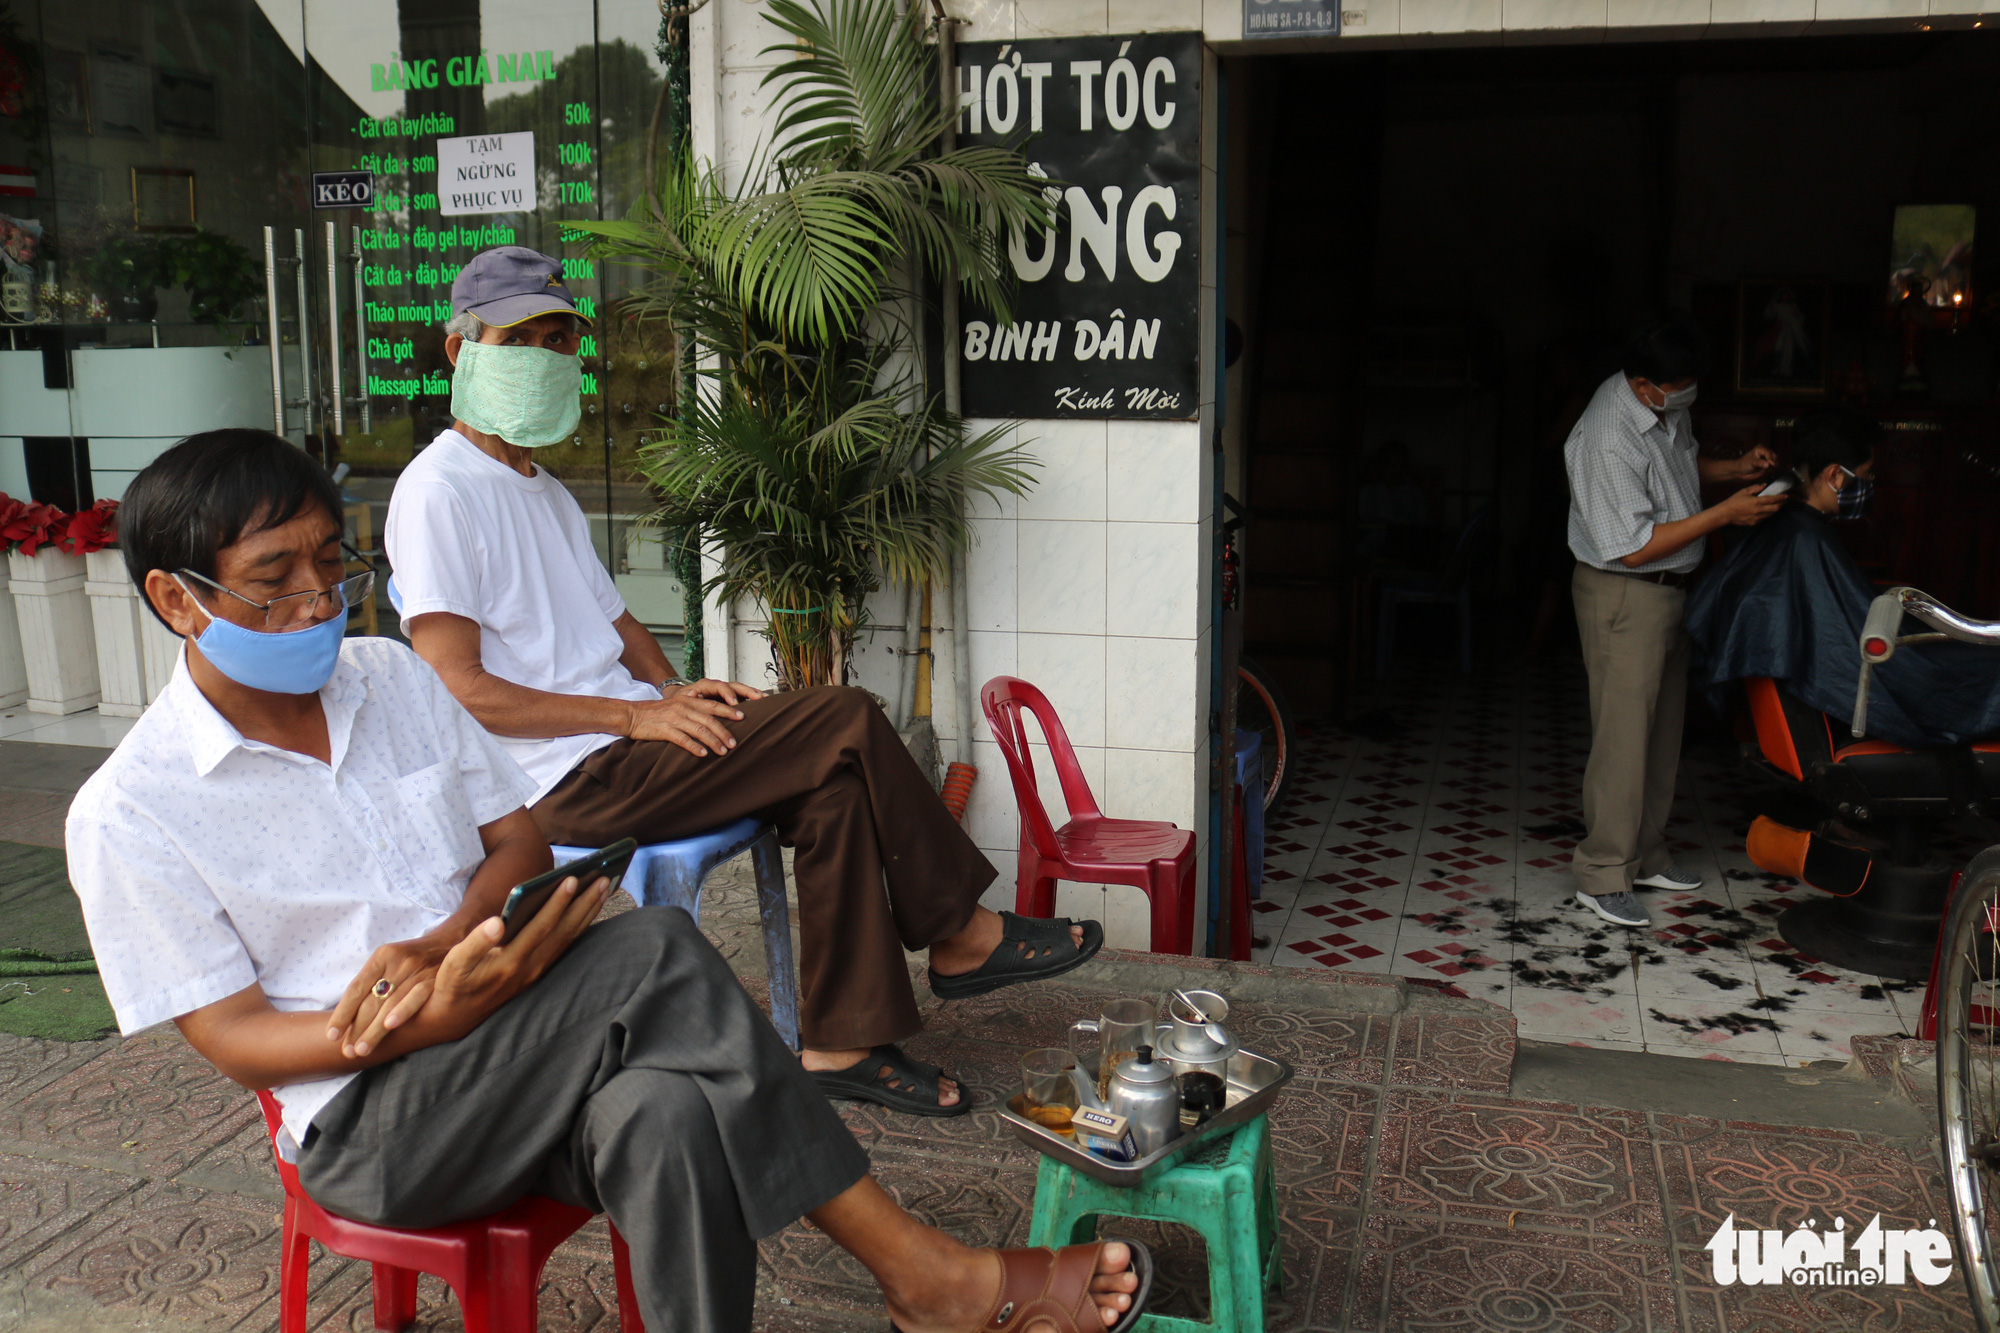 Customers wait for a haircut outside a barbershop in Ho Chi Minh City, Vietnam, April 23, 2020. Photo: Ngoc Phuong / Tuoi Tre